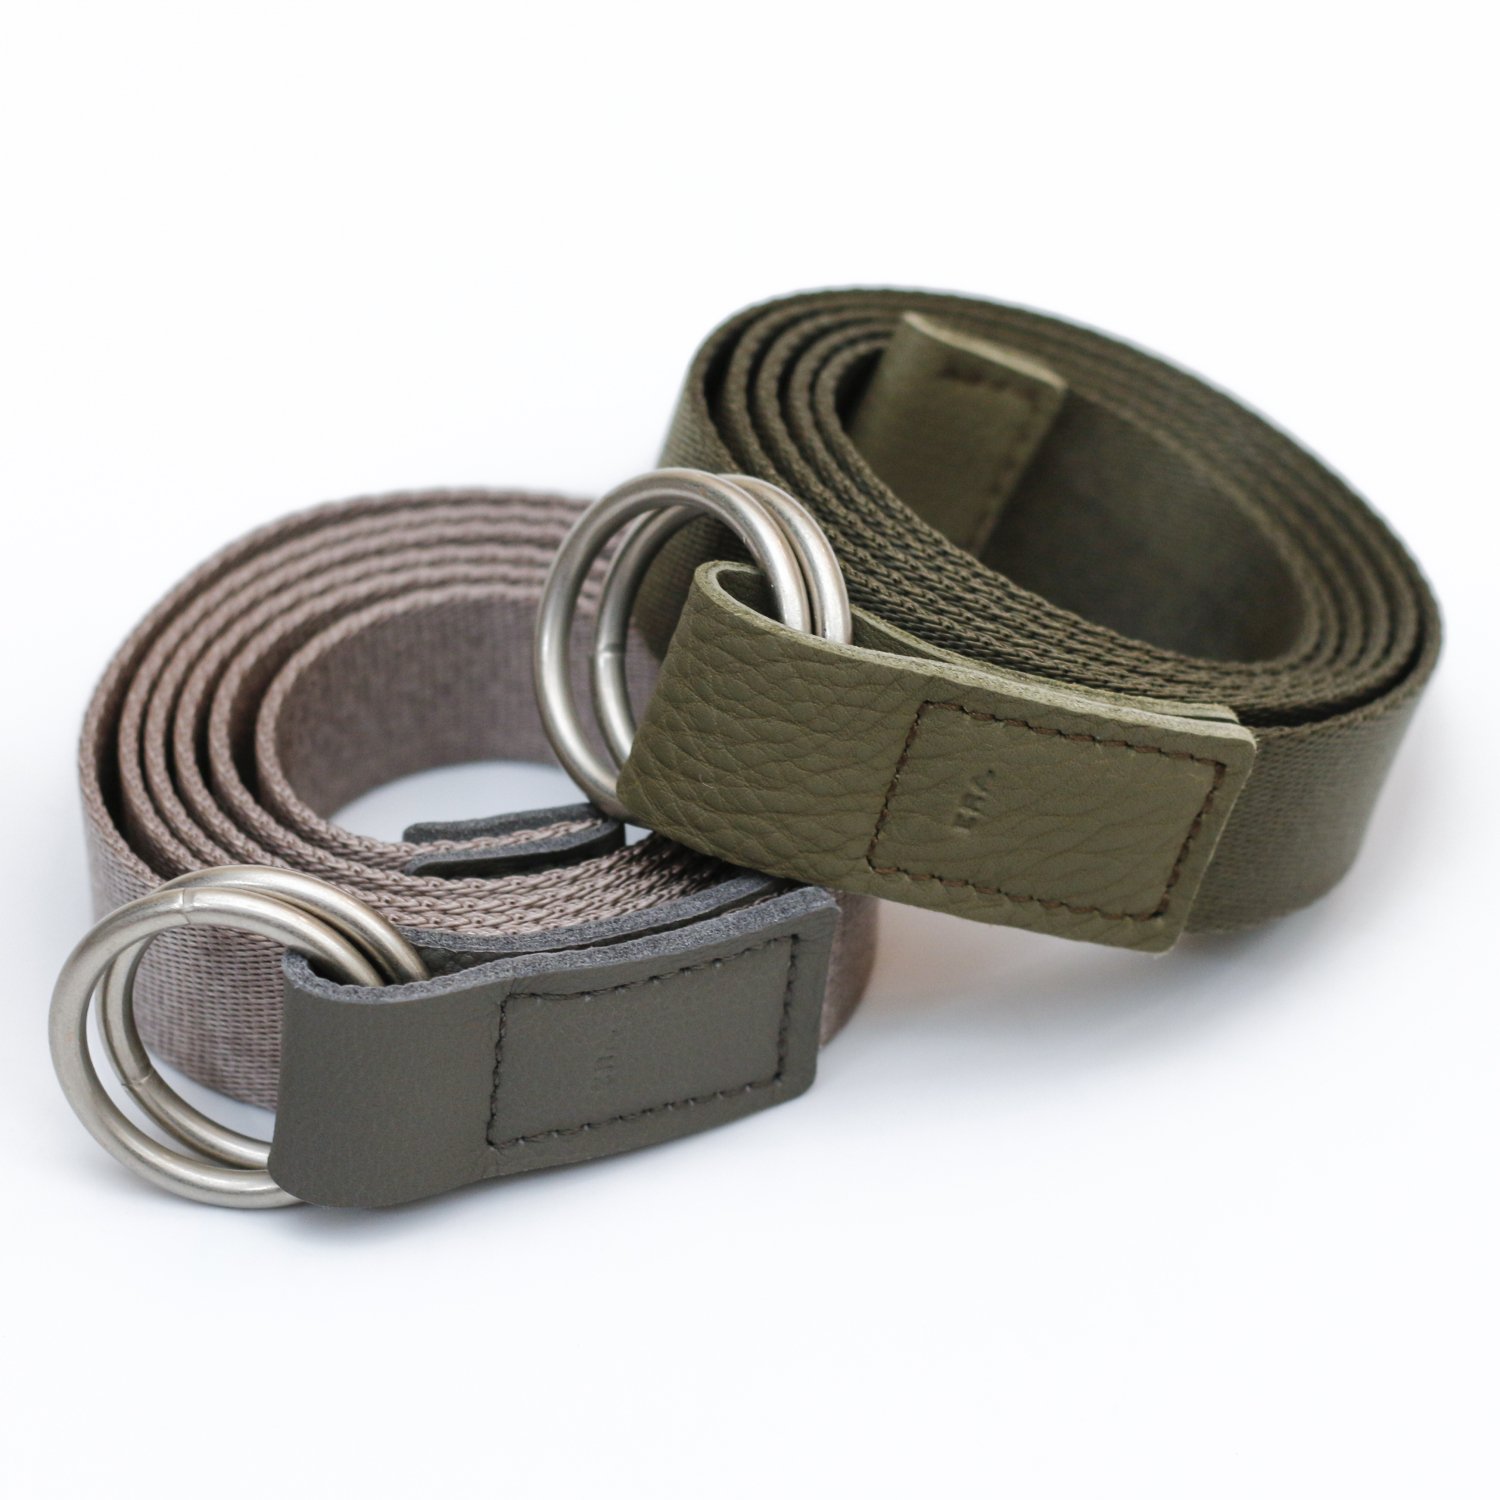 <img class='new_mark_img1' src='https://img.shop-pro.jp/img/new/icons8.gif' style='border:none;display:inline;margin:0px;padding:0px;width:auto;' />ERA <br />STRAP RING BELT
